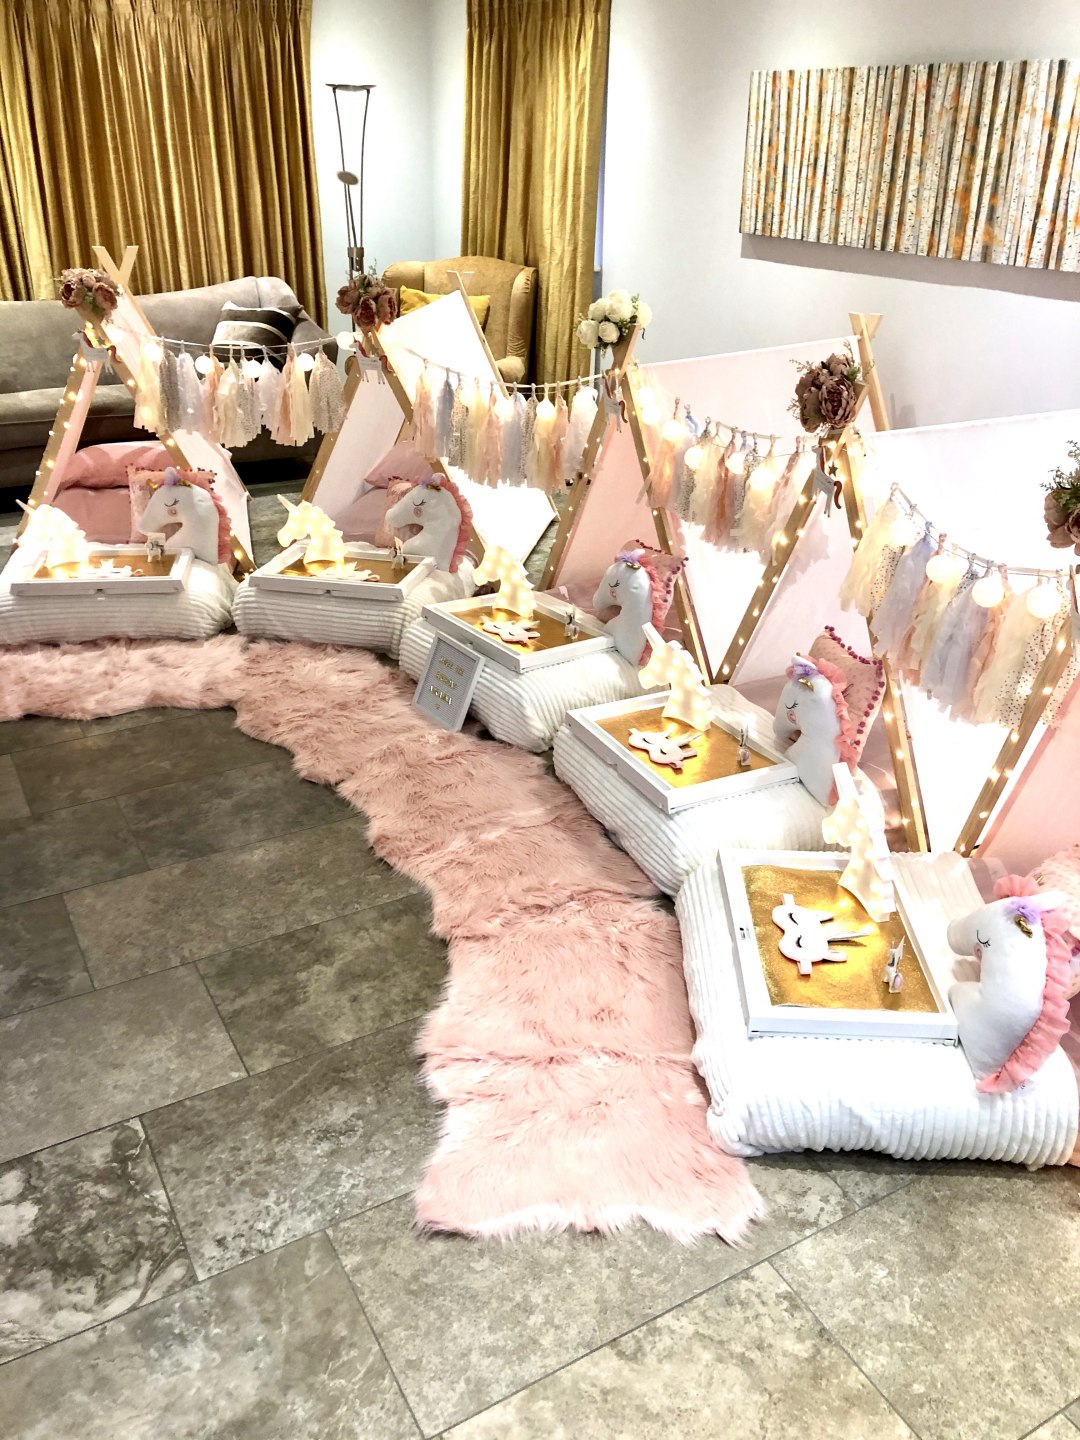 Luxury Children's Teepee Sleepover Party Hire in Surrey. With 6 themes to choose from, we take care of everything so you don't have to!